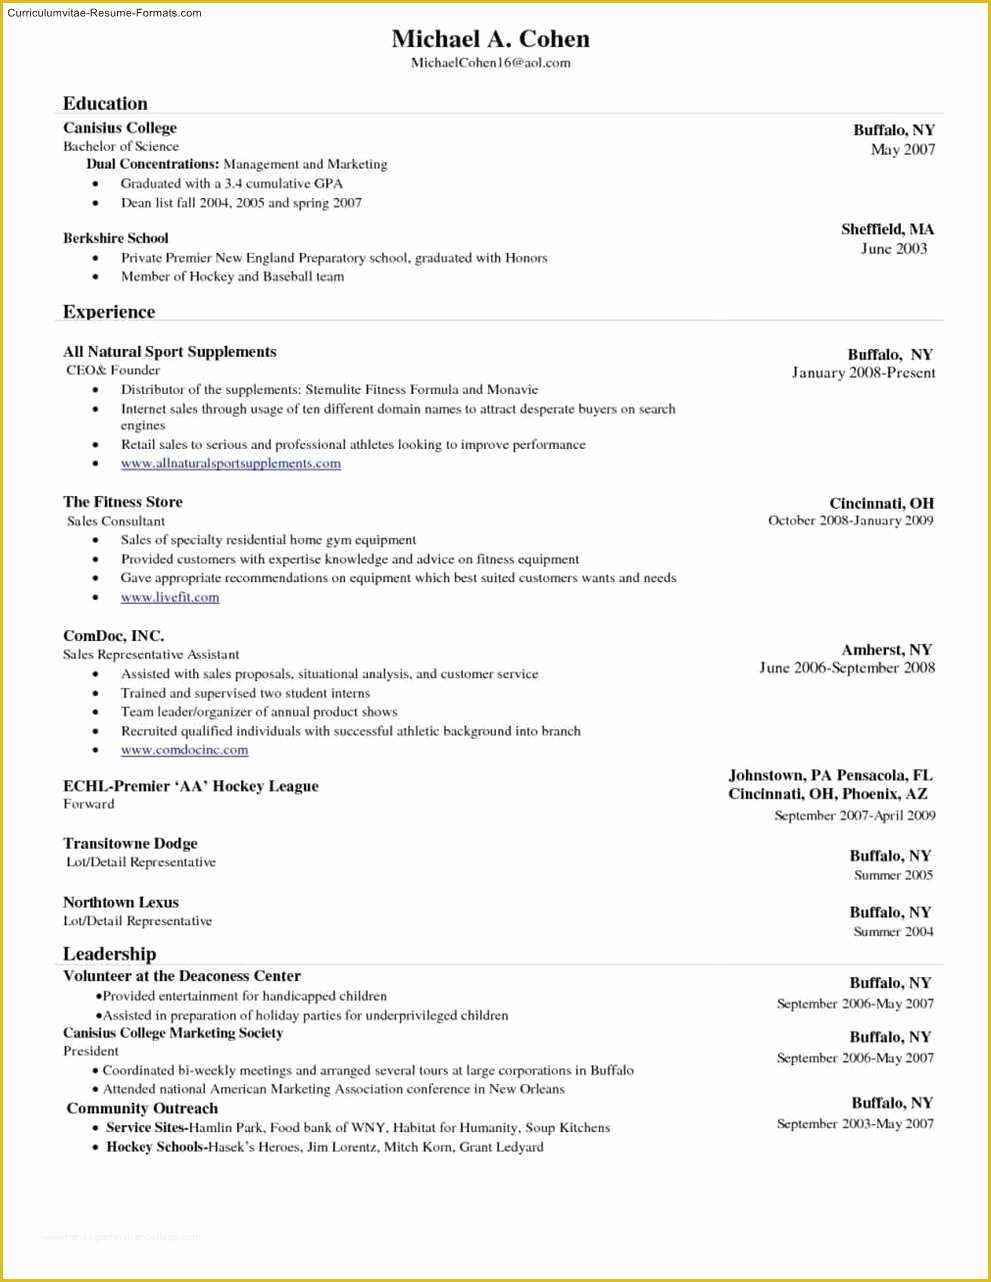 Free Resume Templates for Word Starter 2010 Of How to Write Equations In Microsoft Word Starter 2010